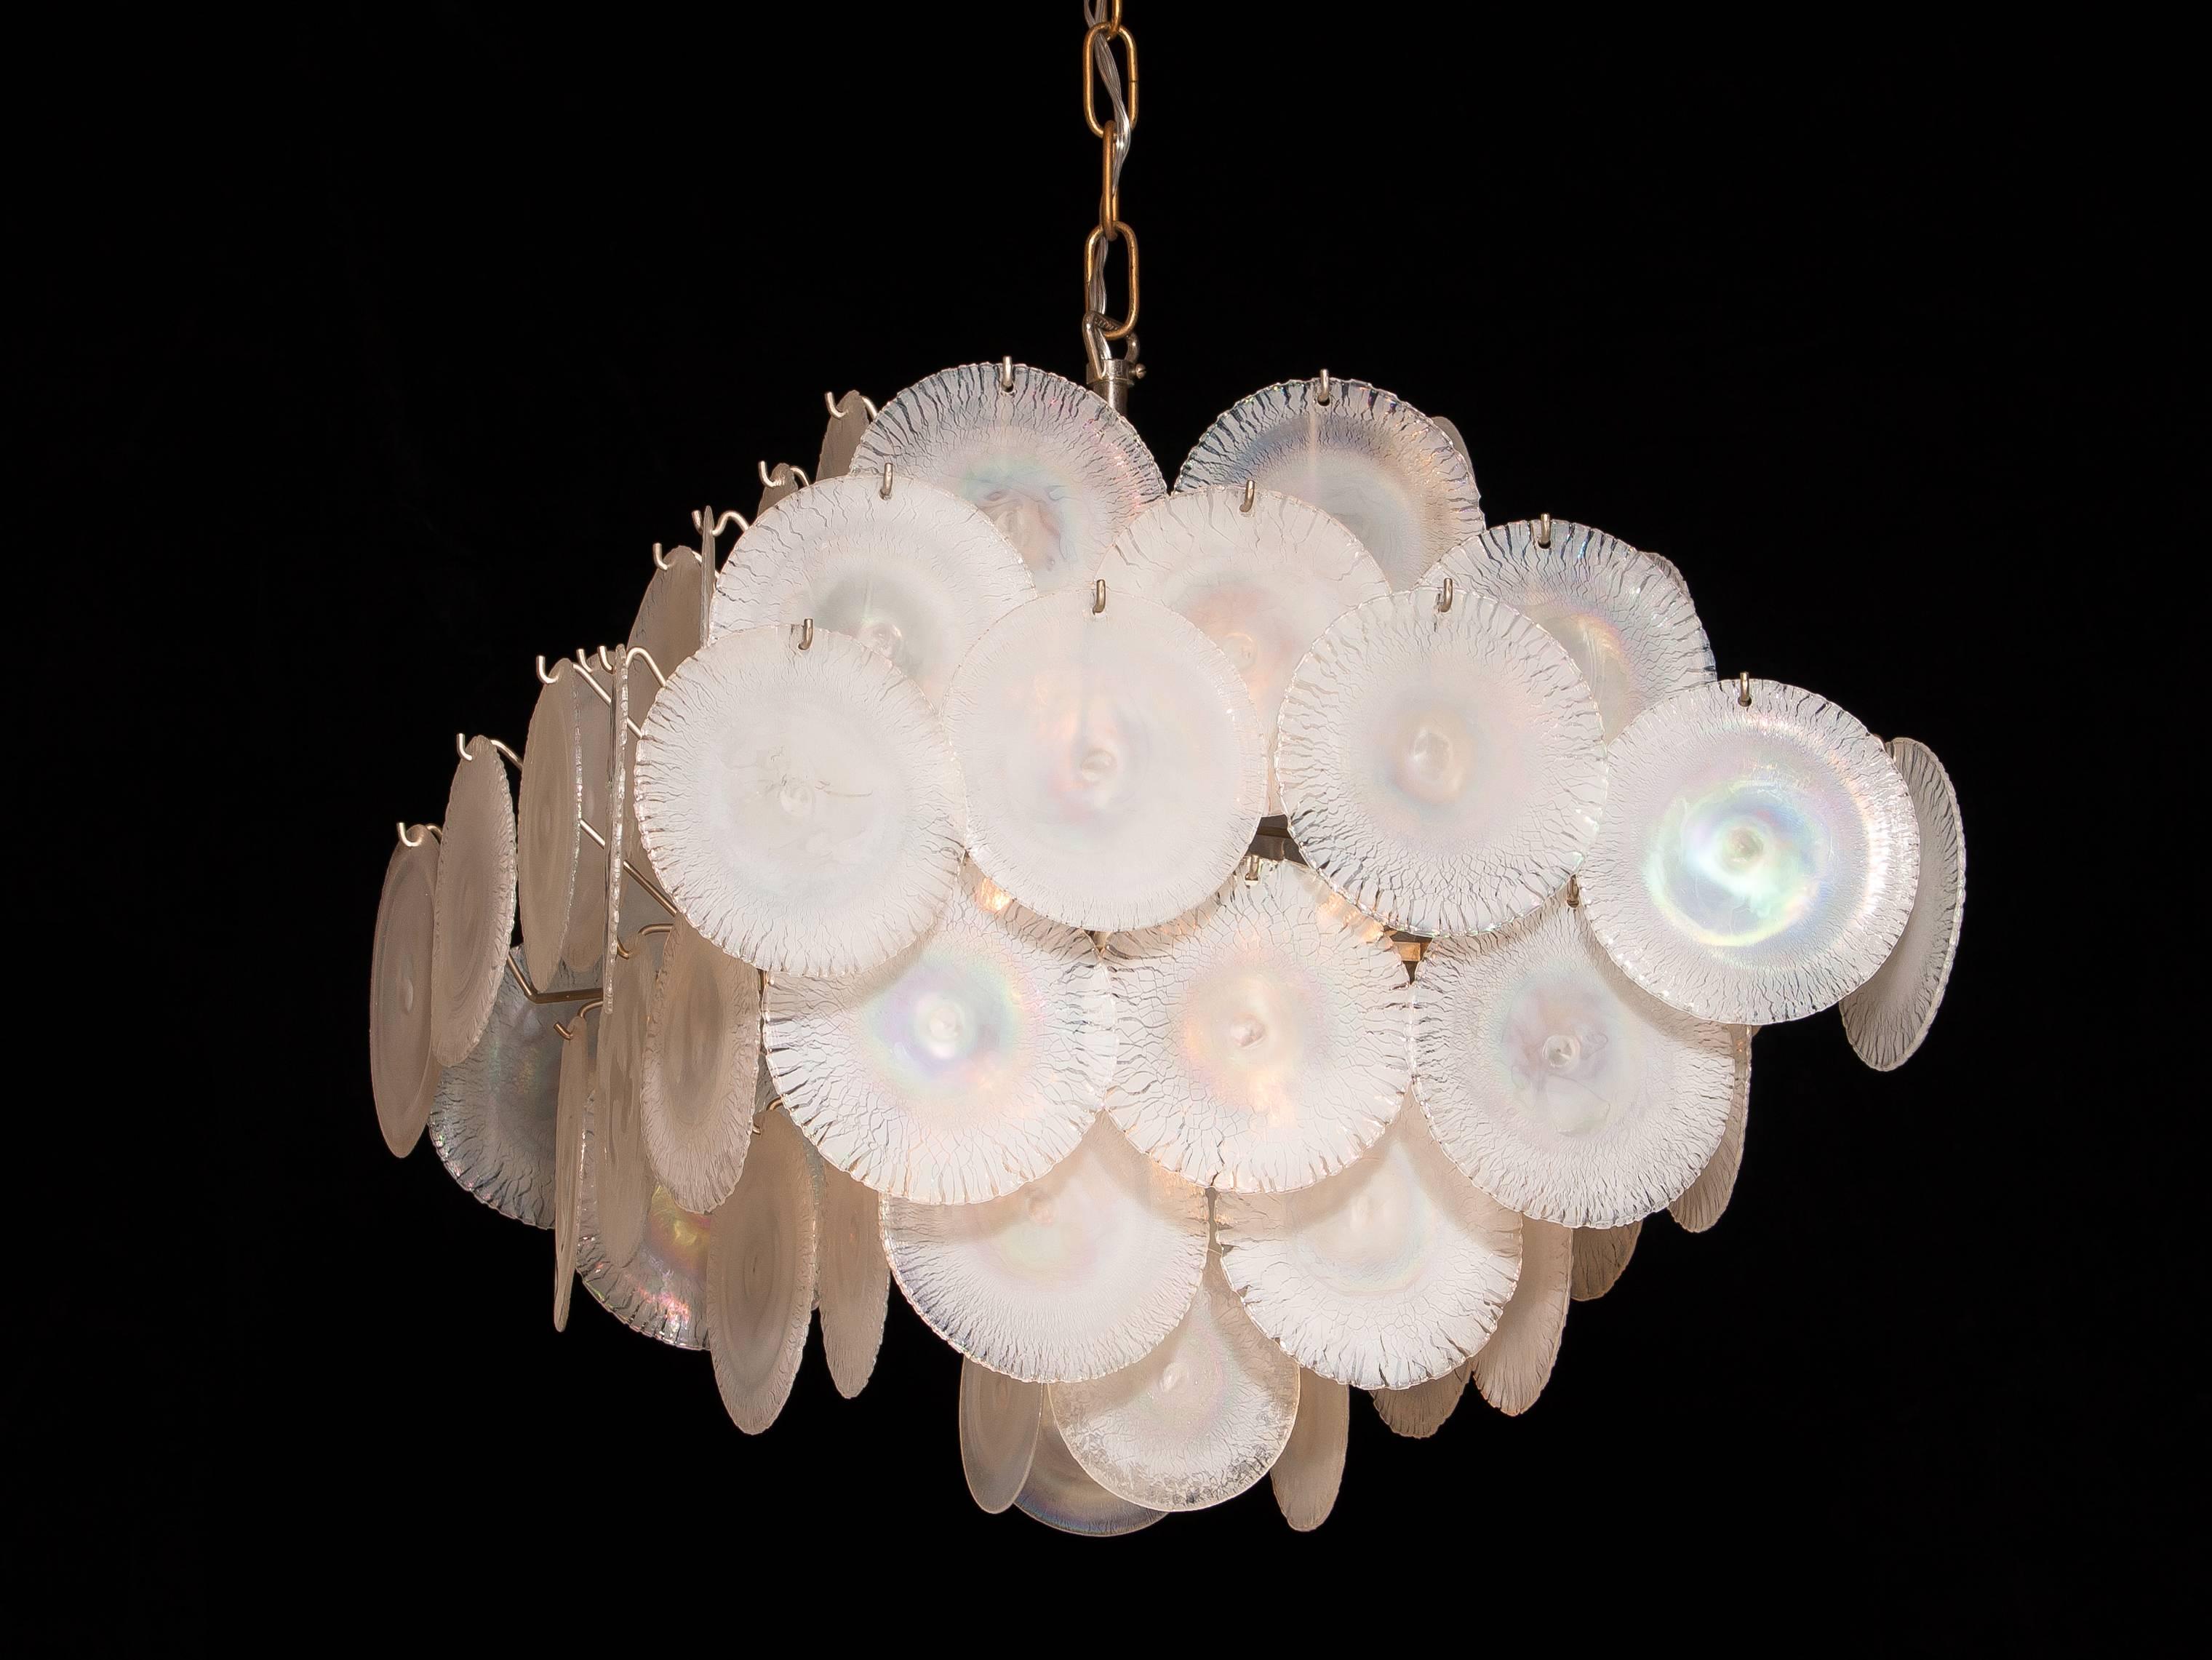 Set of Two Gino Vistosi Chandeliers with White or Pearl Murano Crystal Discs 5